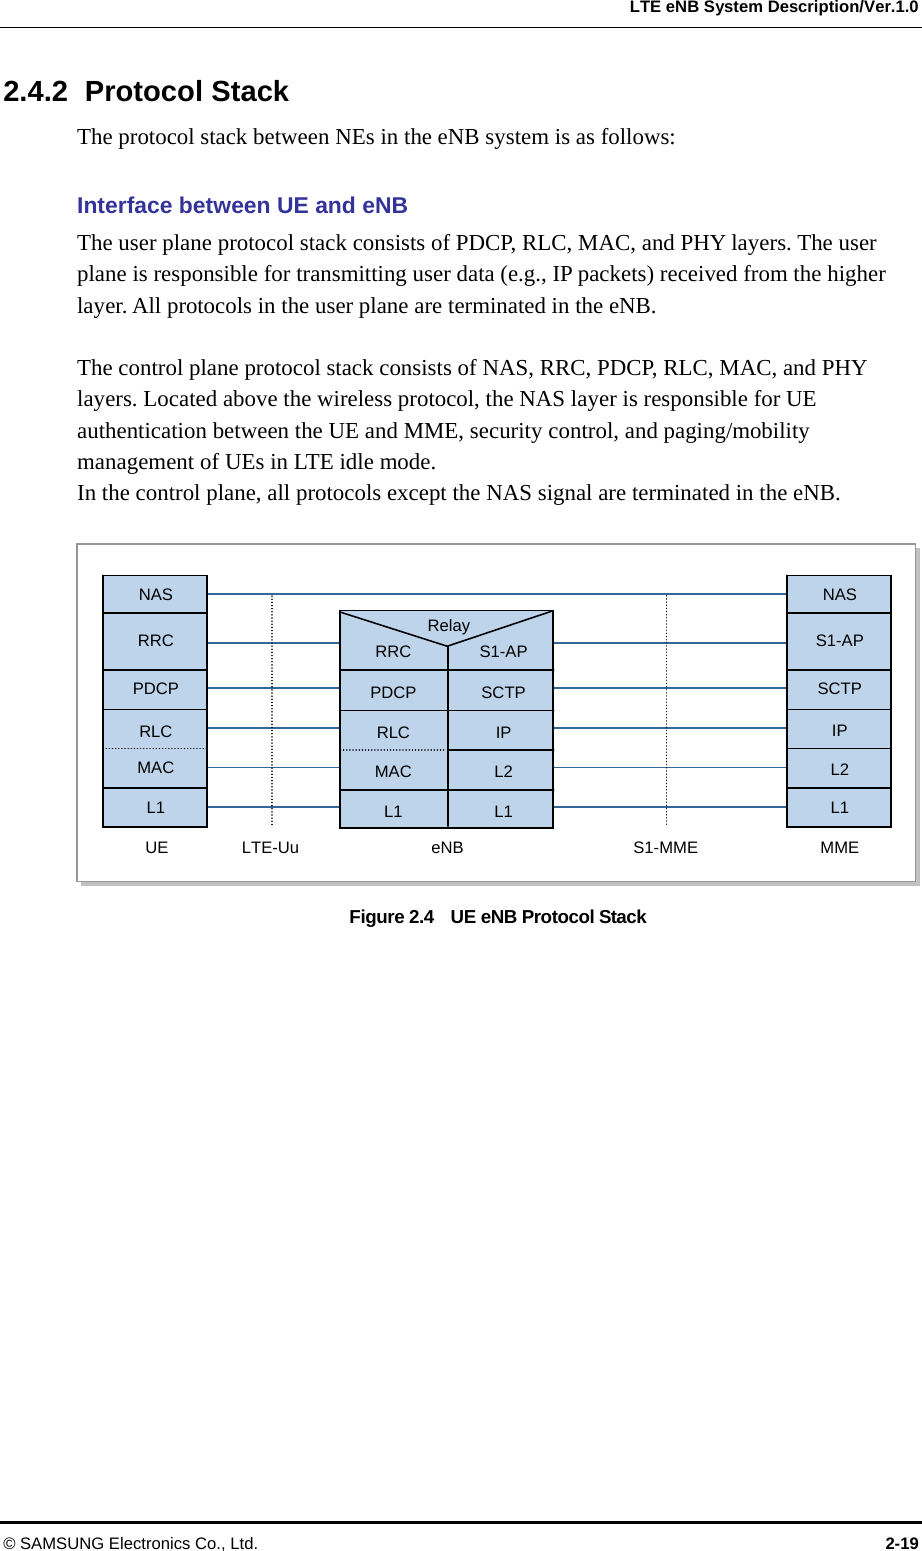  LTE eNB System Description/Ver.1.0 2.4.2 Protocol Stack The protocol stack between NEs in the eNB system is as follows:  Interface between UE and eNB The user plane protocol stack consists of PDCP, RLC, MAC, and PHY layers. The user plane is responsible for transmitting user data (e.g., IP packets) received from the higher layer. All protocols in the user plane are terminated in the eNB.  The control plane protocol stack consists of NAS, RRC, PDCP, RLC, MAC, and PHY layers. Located above the wireless protocol, the NAS layer is responsible for UE authentication between the UE and MME, security control, and paging/mobility management of UEs in LTE idle mode. In the control plane, all protocols except the NAS signal are terminated in the eNB.    NAS RRC PDCP  RLC  MAC  L1 NAS  S1-AP  SCTP  IP  L2  L1 RRC  PDCP  RLC  MAC  L1 S1-AP  SCTP  IP  L2  L1 UE LTE-Uu  eNB Relay MME S1-MME Figure 2.4    UE eNB Protocol Stack  © SAMSUNG Electronics Co., Ltd.  2-19 